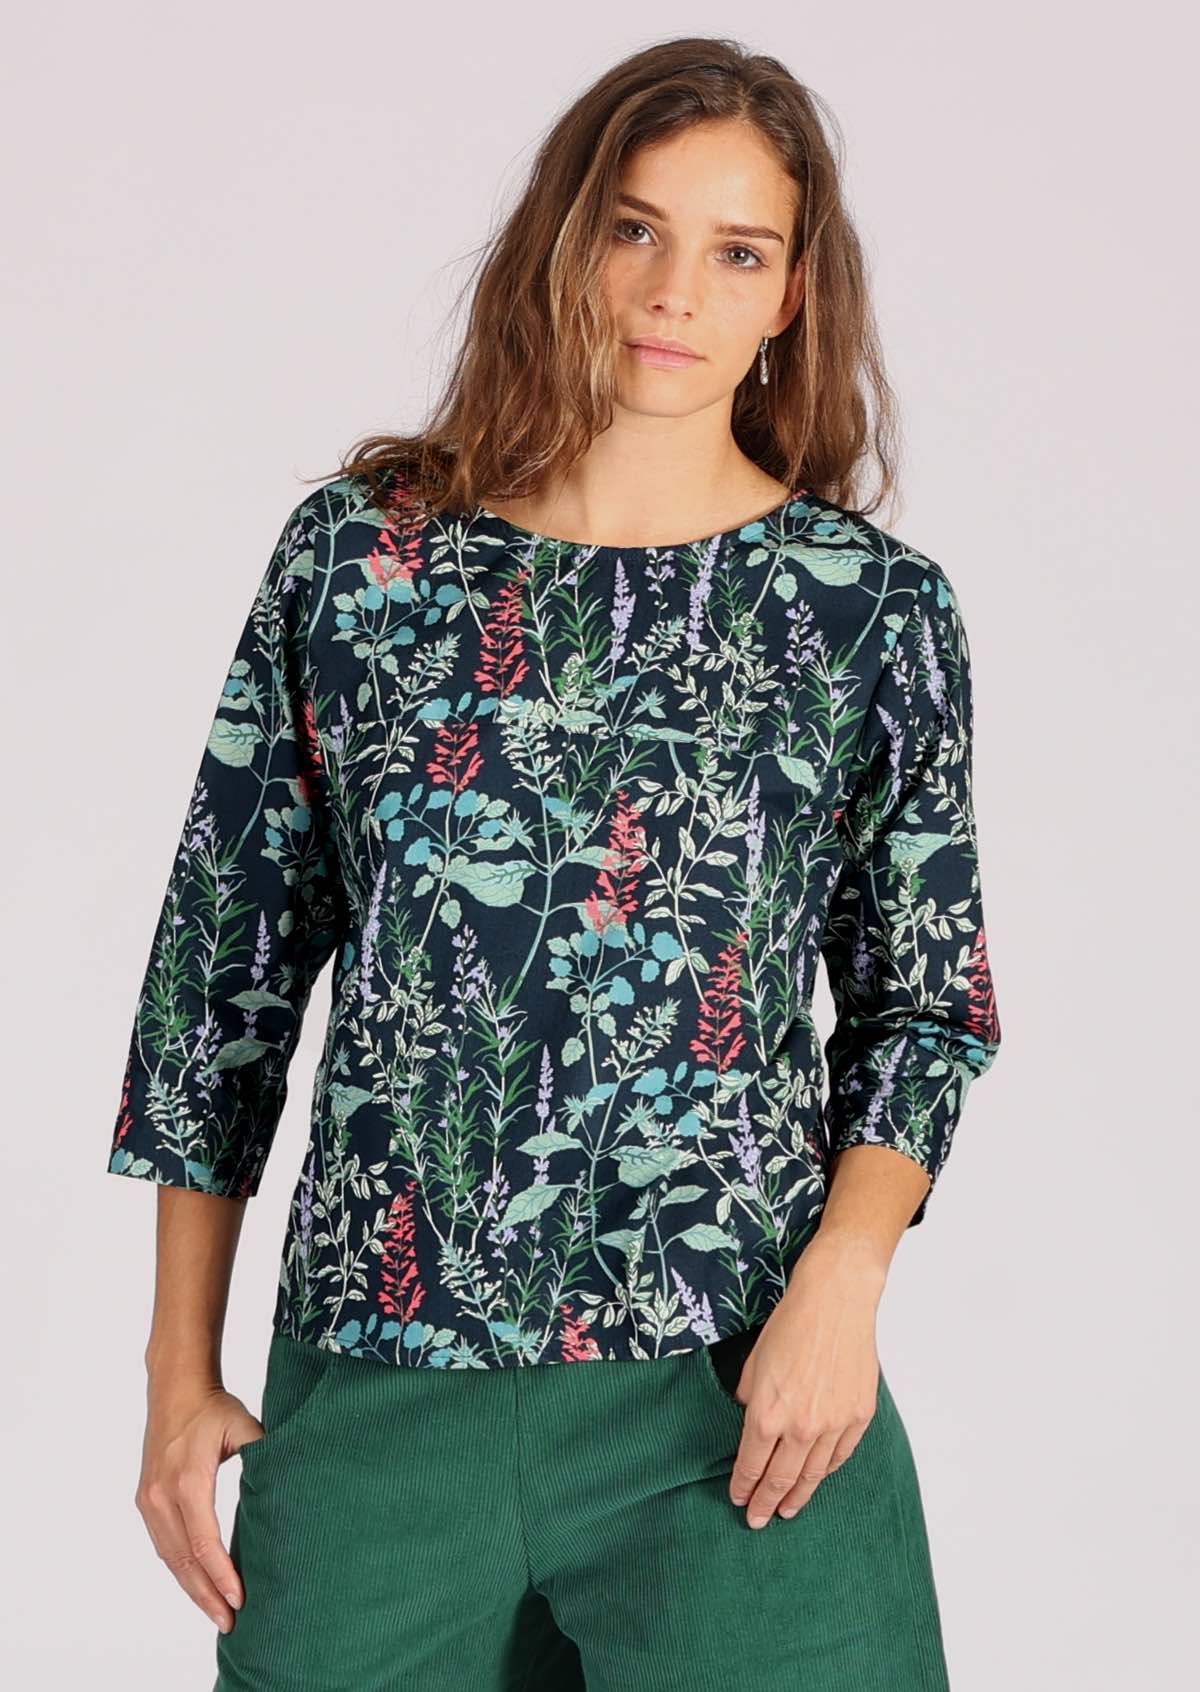 100% cotton top with floral print on dark teal base